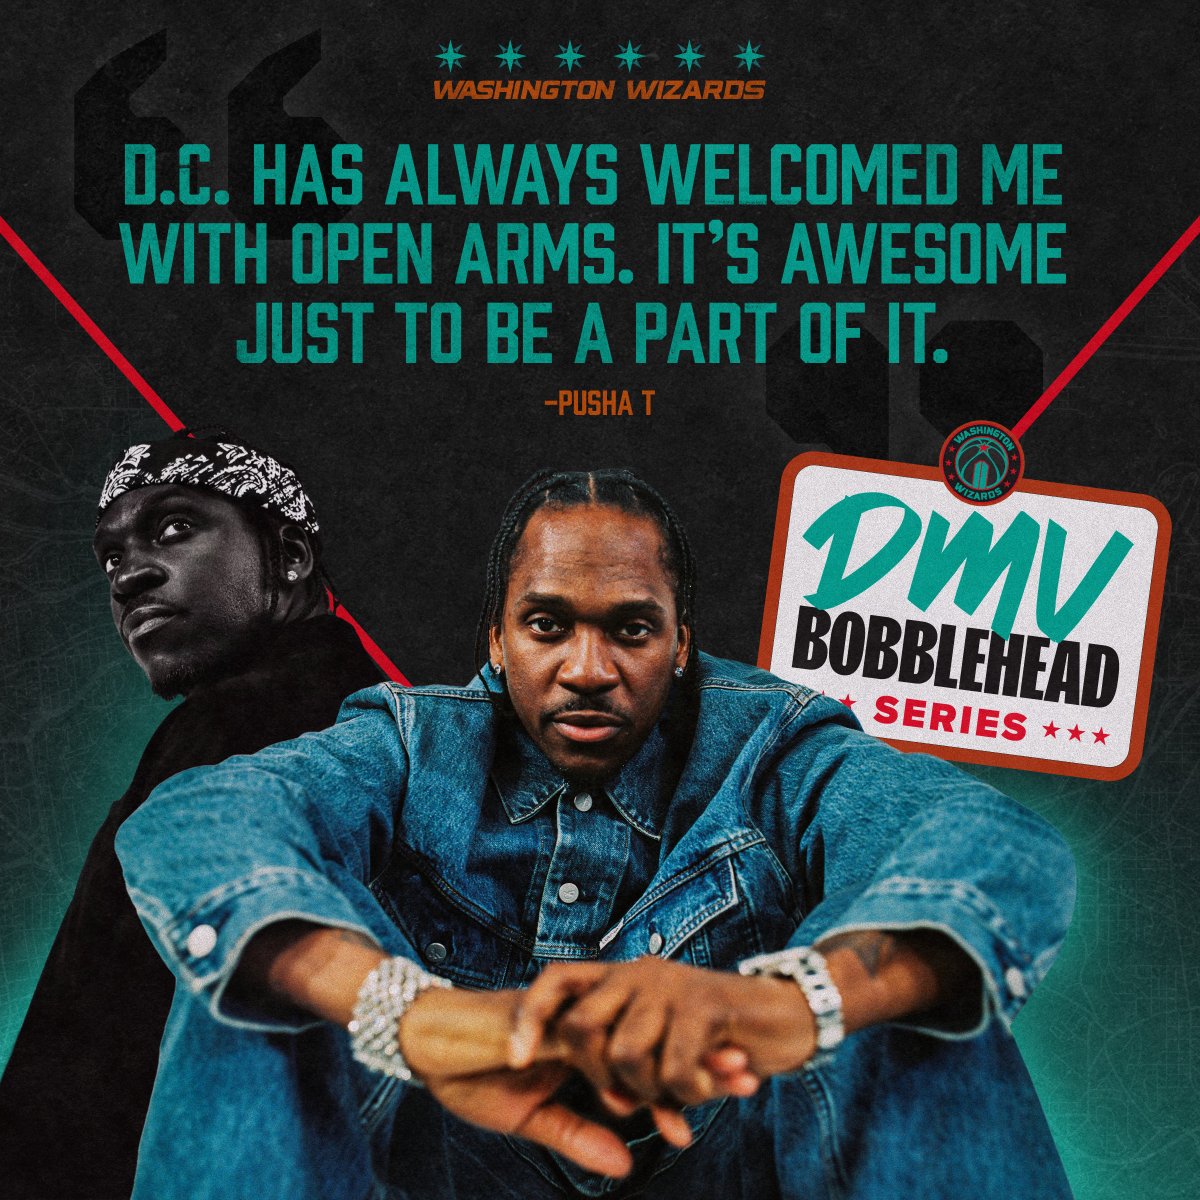 On Sunday, we're giving the first 10K fans inside the arena a @PUSHA_T bobblehead. 🤝 📰 Read more on the hip-hop icon's ties to the DMV and how this came together: on.nba.com/3T8wbha